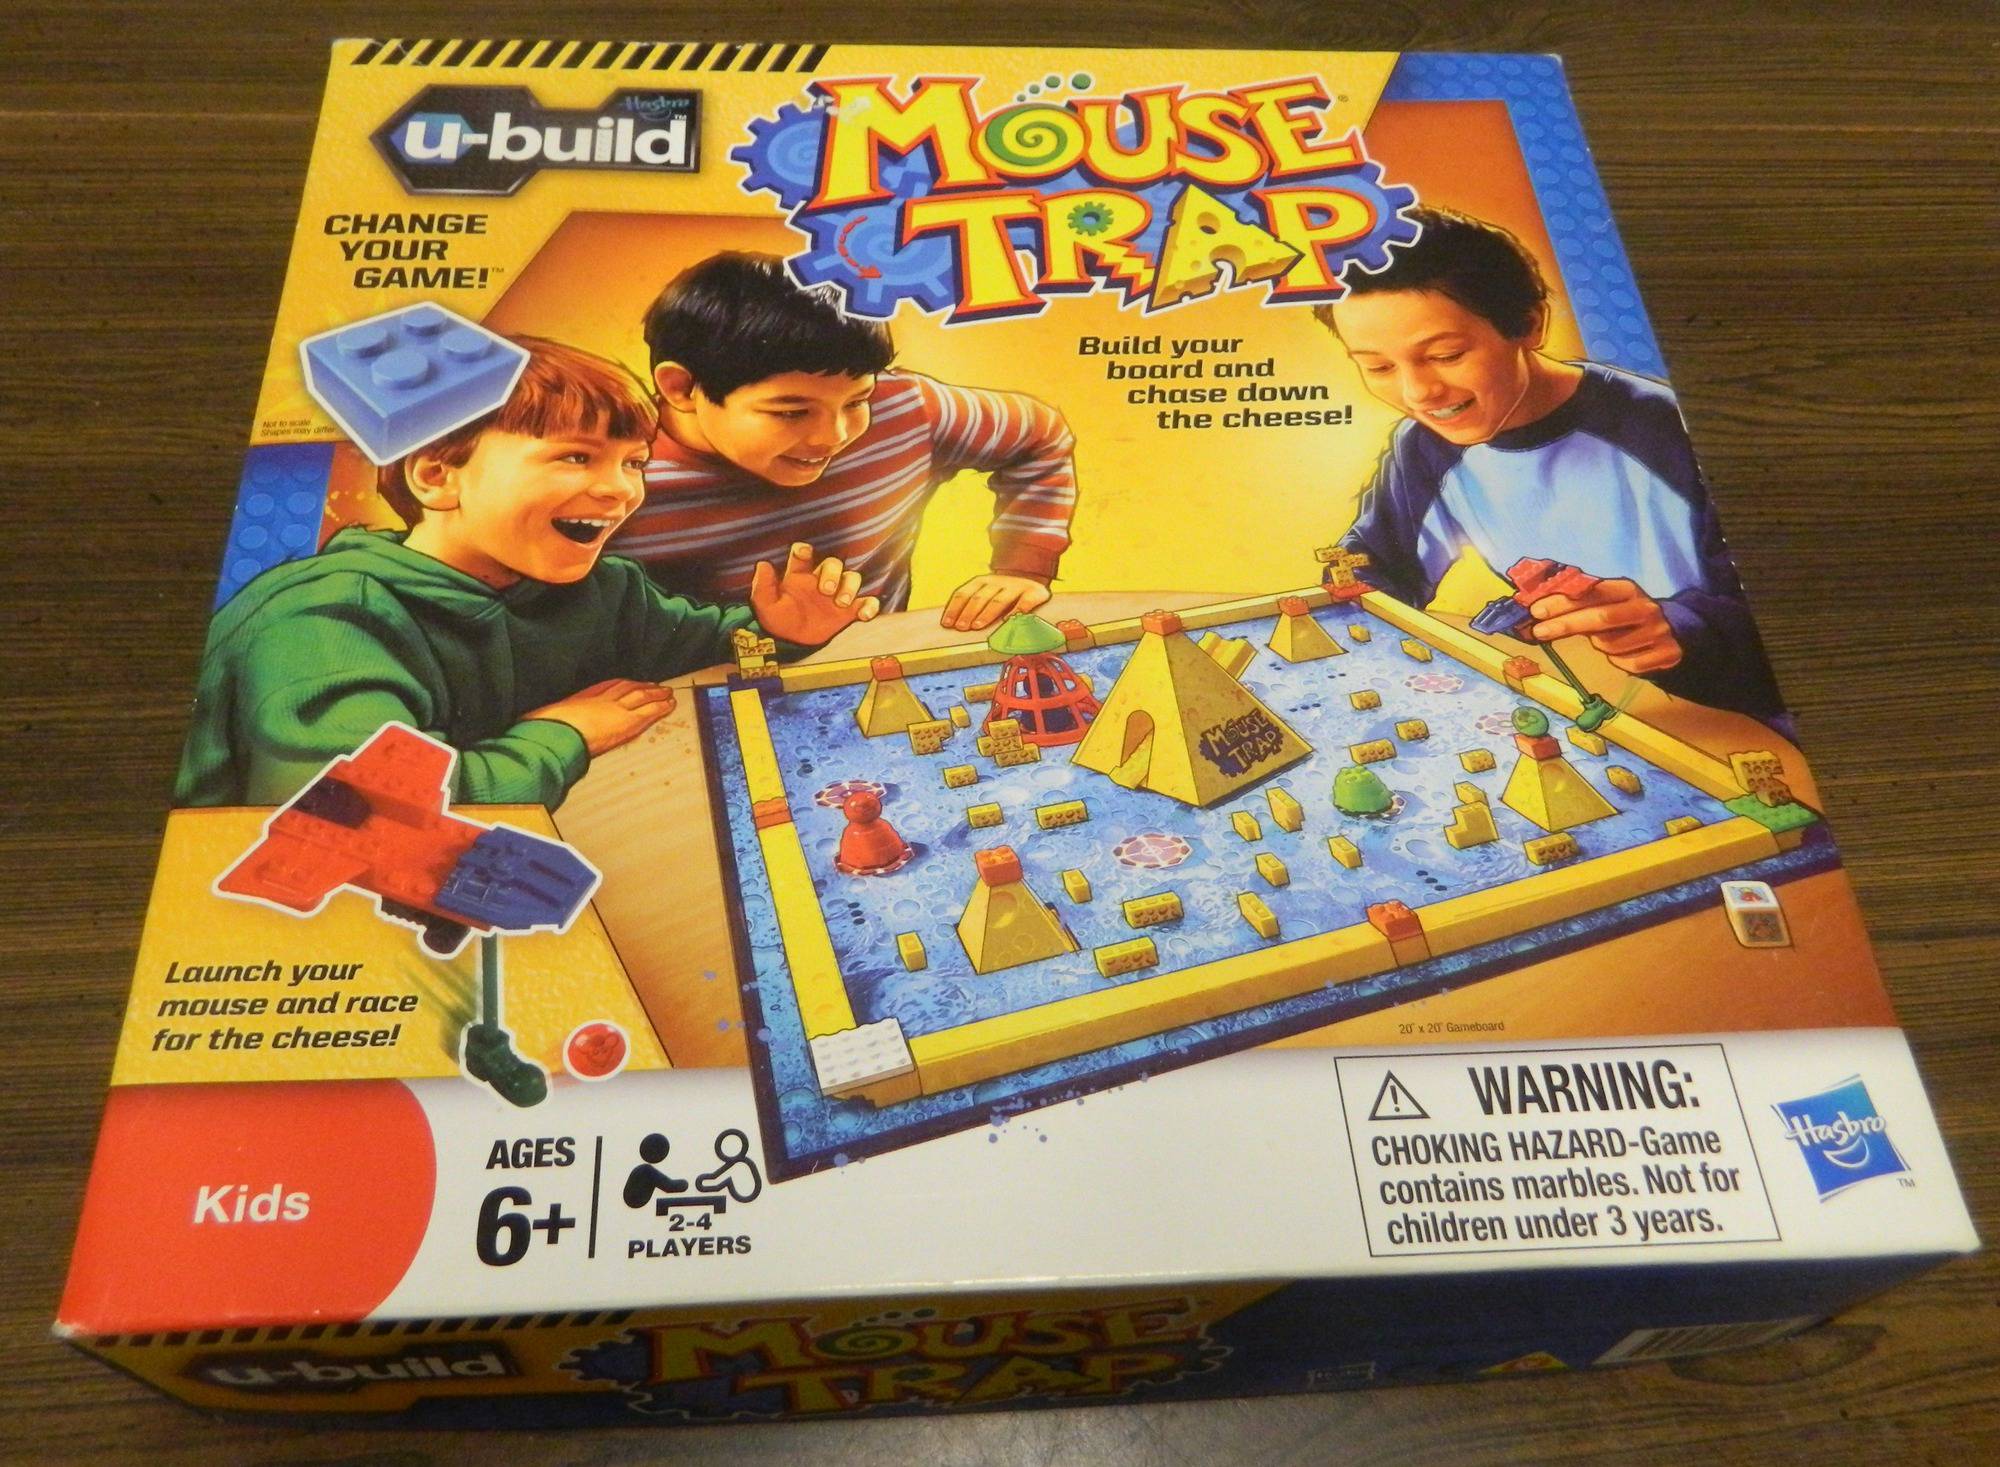 U-Build Mouse Trap Board Game Review and Rules